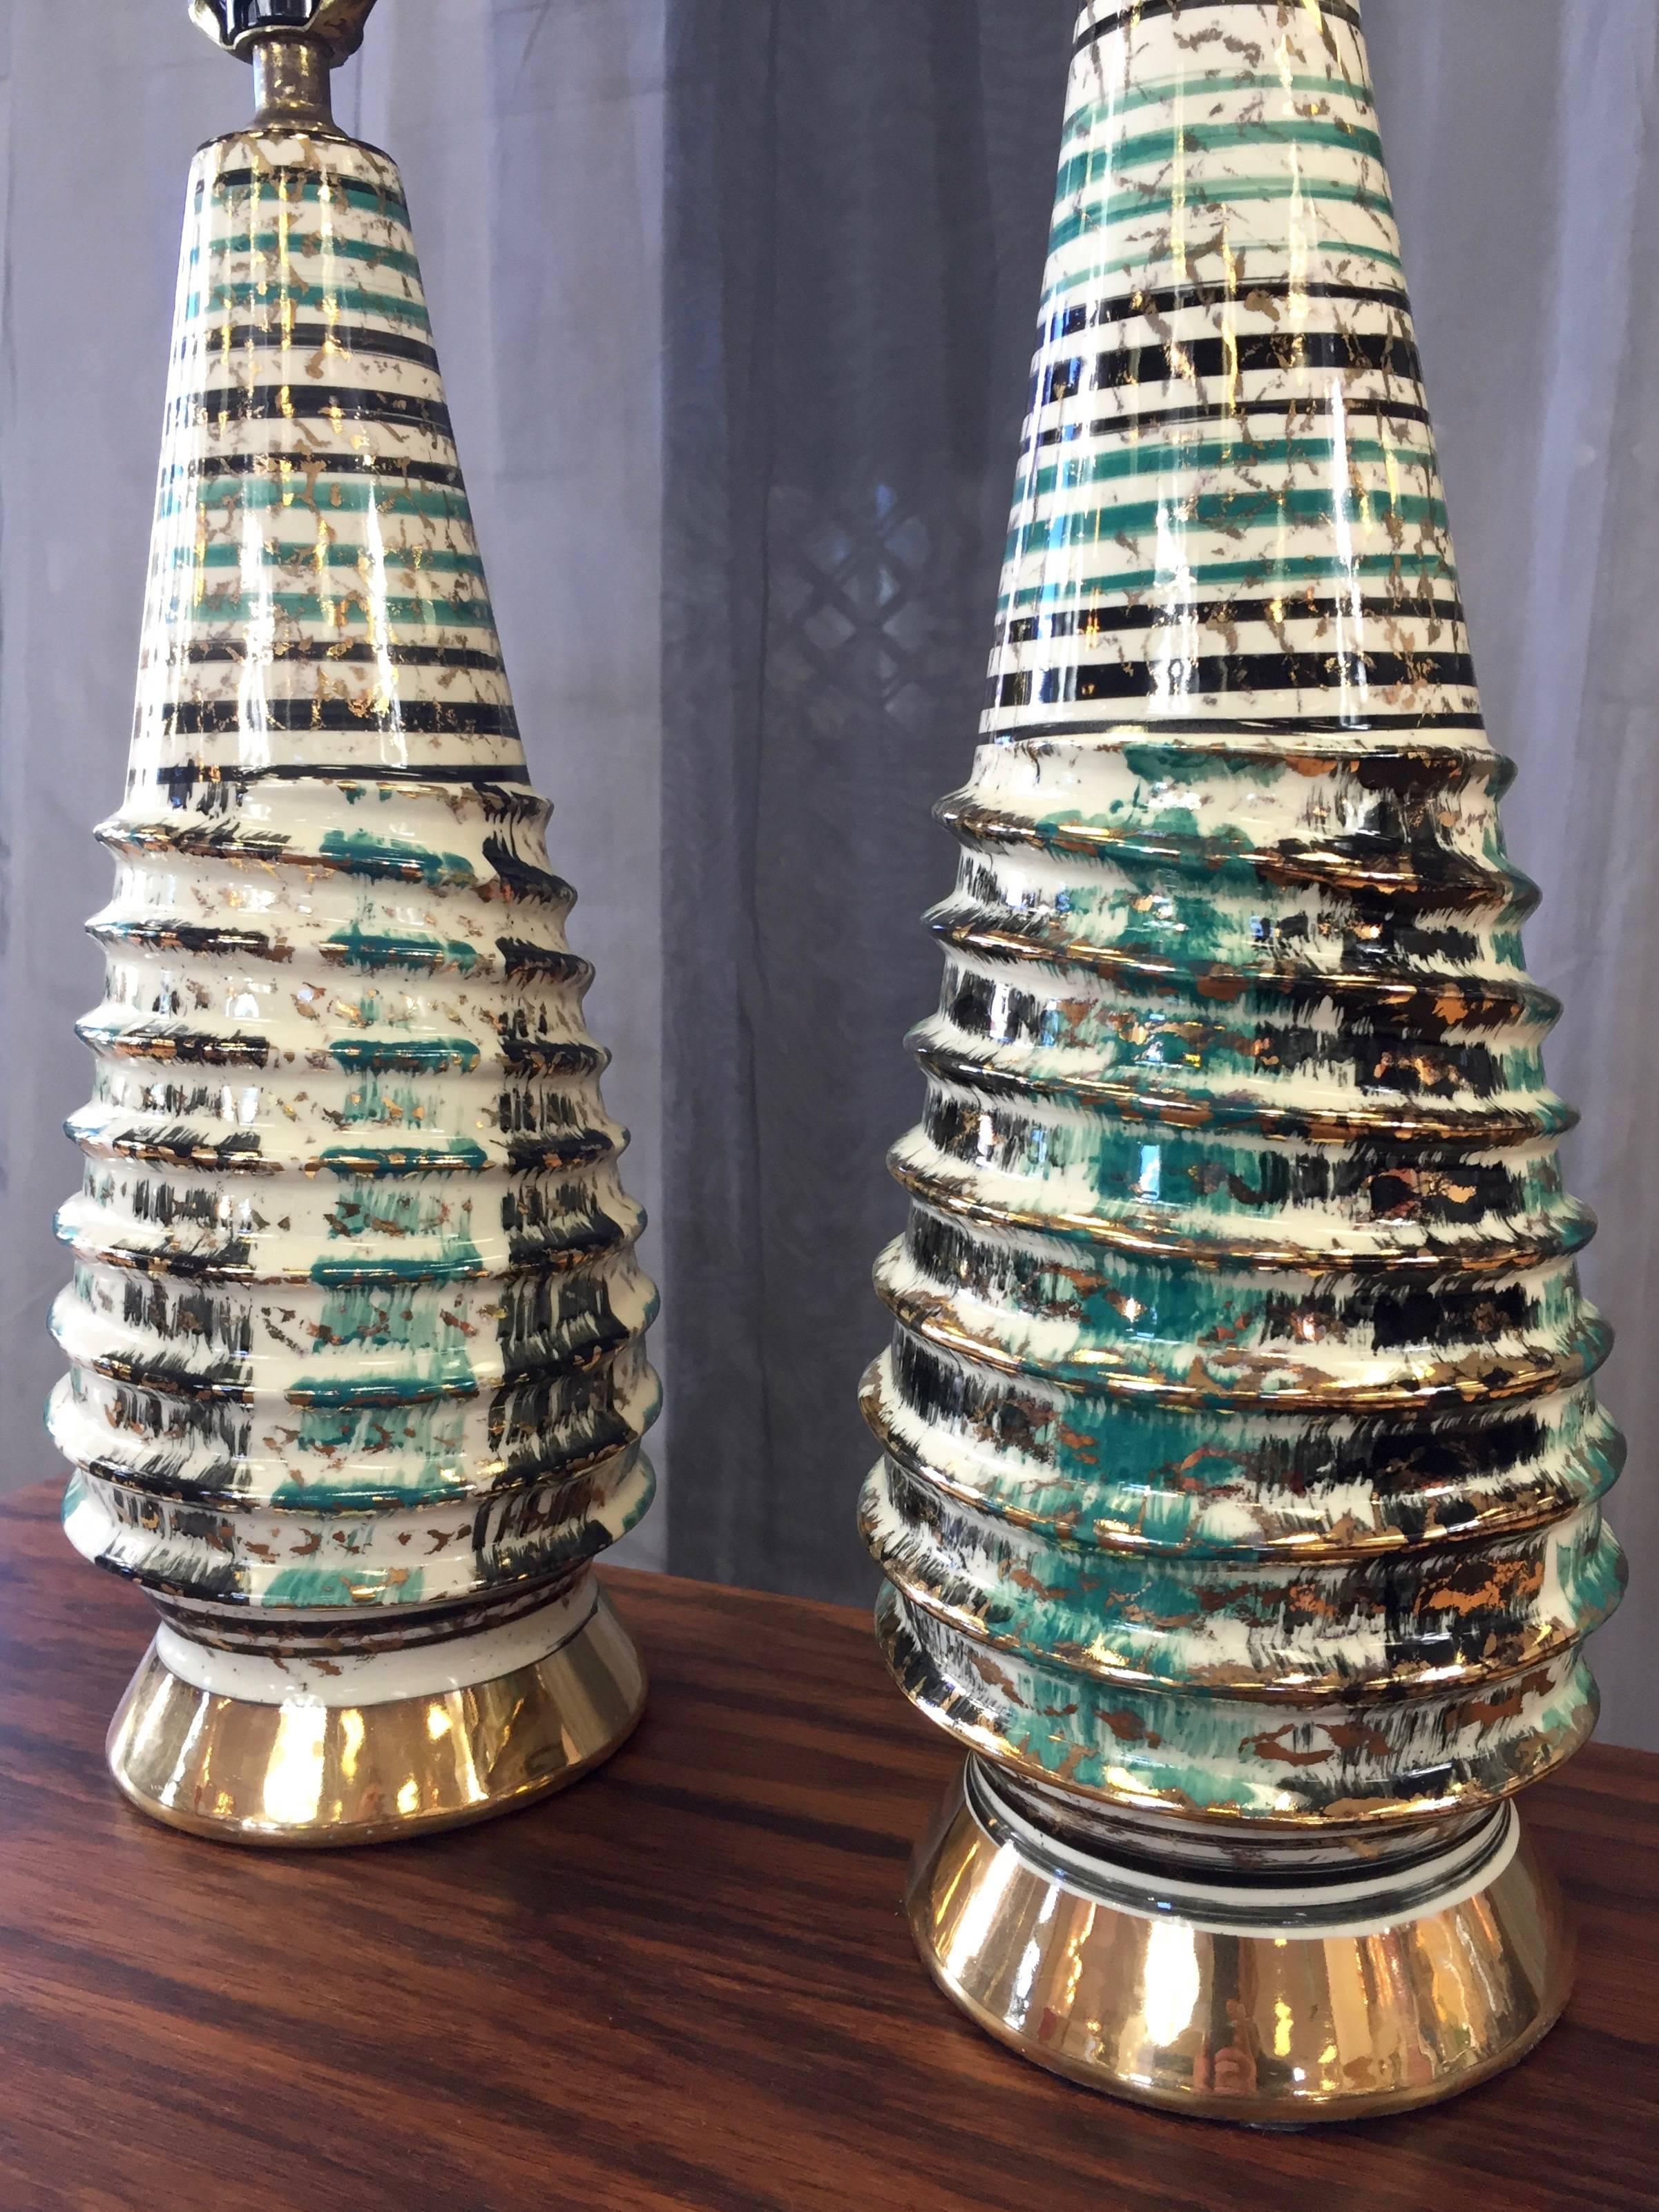 A Mid-Century Modern or Hollywood Regency pair of tall ceramic table lamps with sculptural bodies and hand-applied glaze.

Uncommon and handsome screw-like form is finished in off-white with painterly black, teal, and gleaming gold decoration.